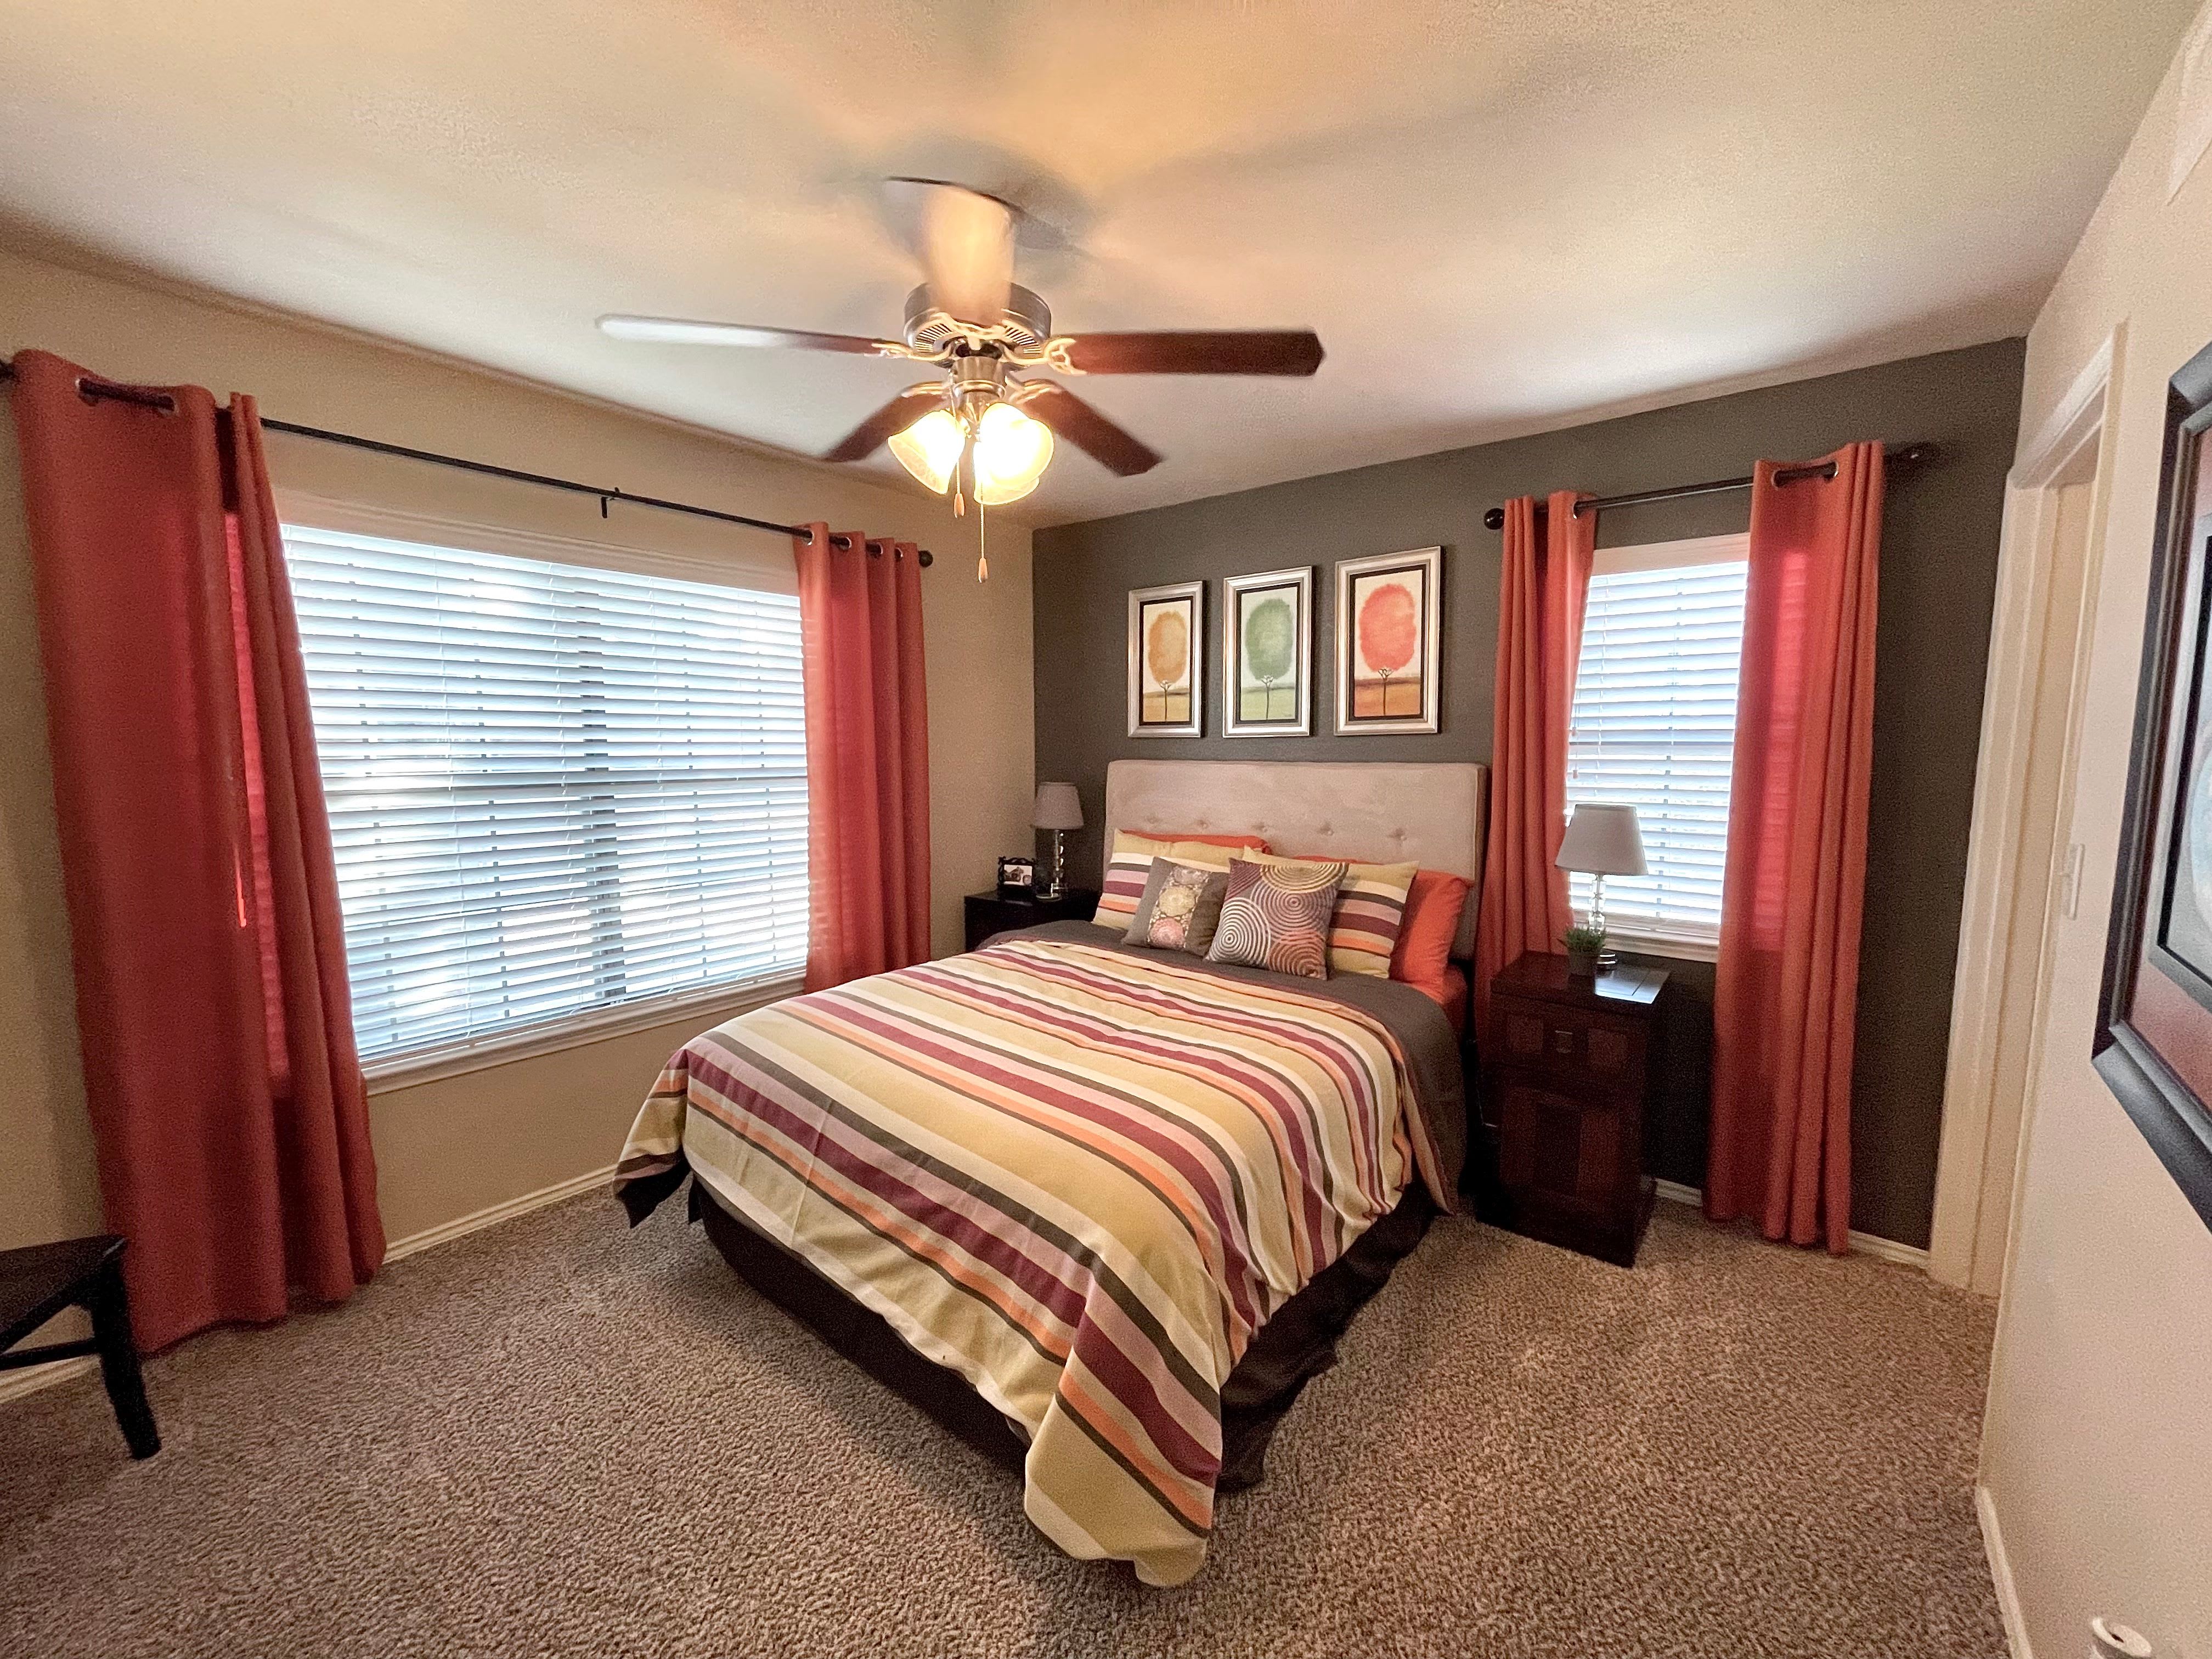 Floor plan options at The Abbey at Hightower in North Richland Hills